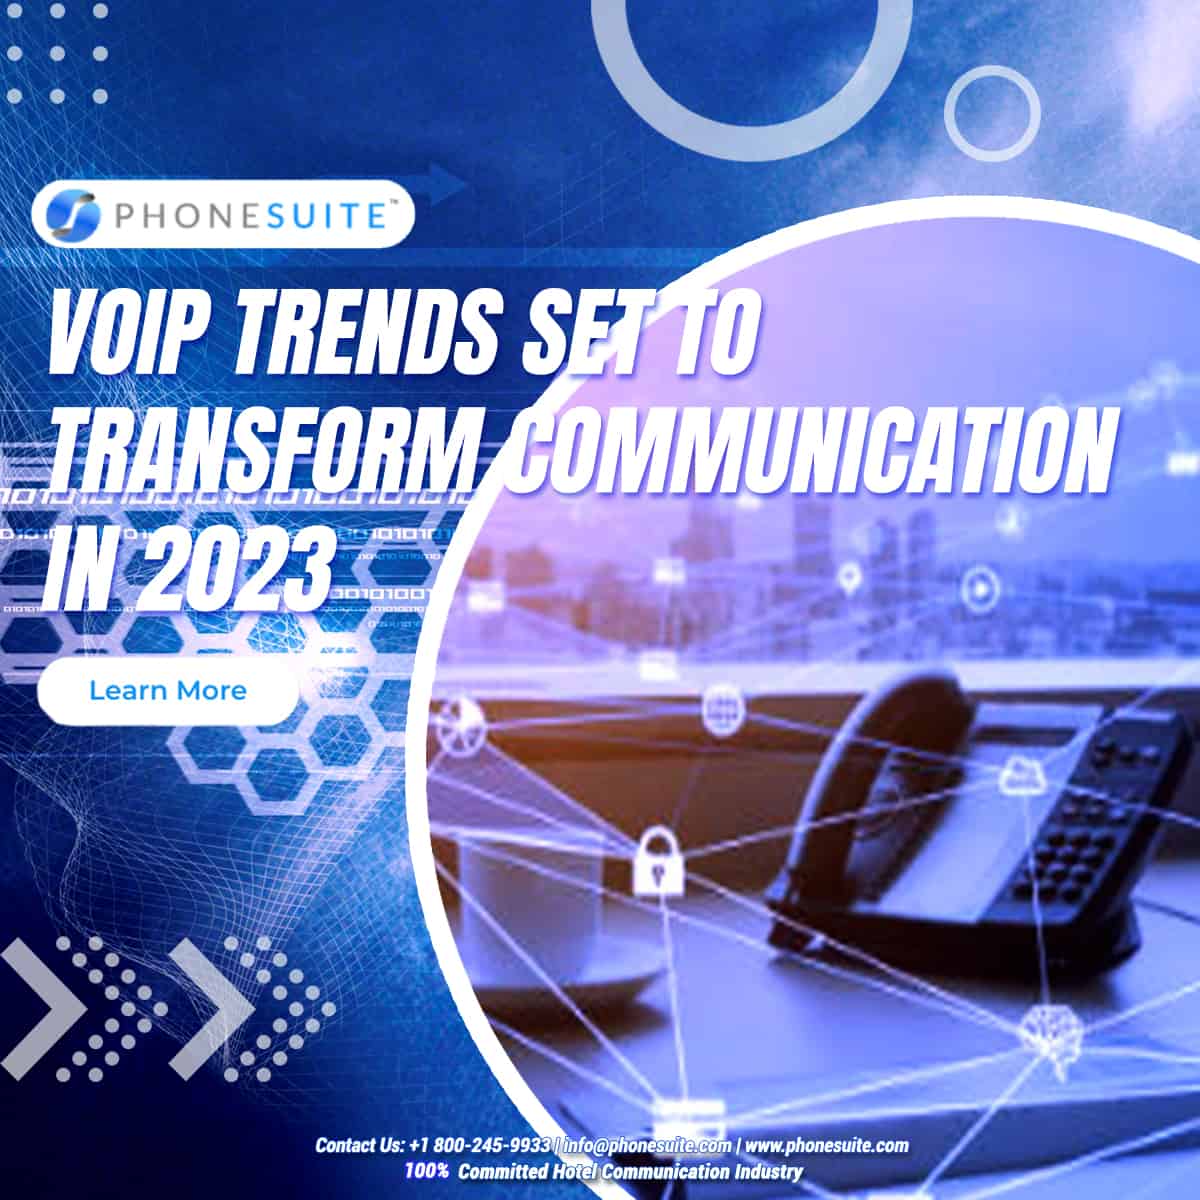 VoIP Trends Set to Transform Communication in 2023